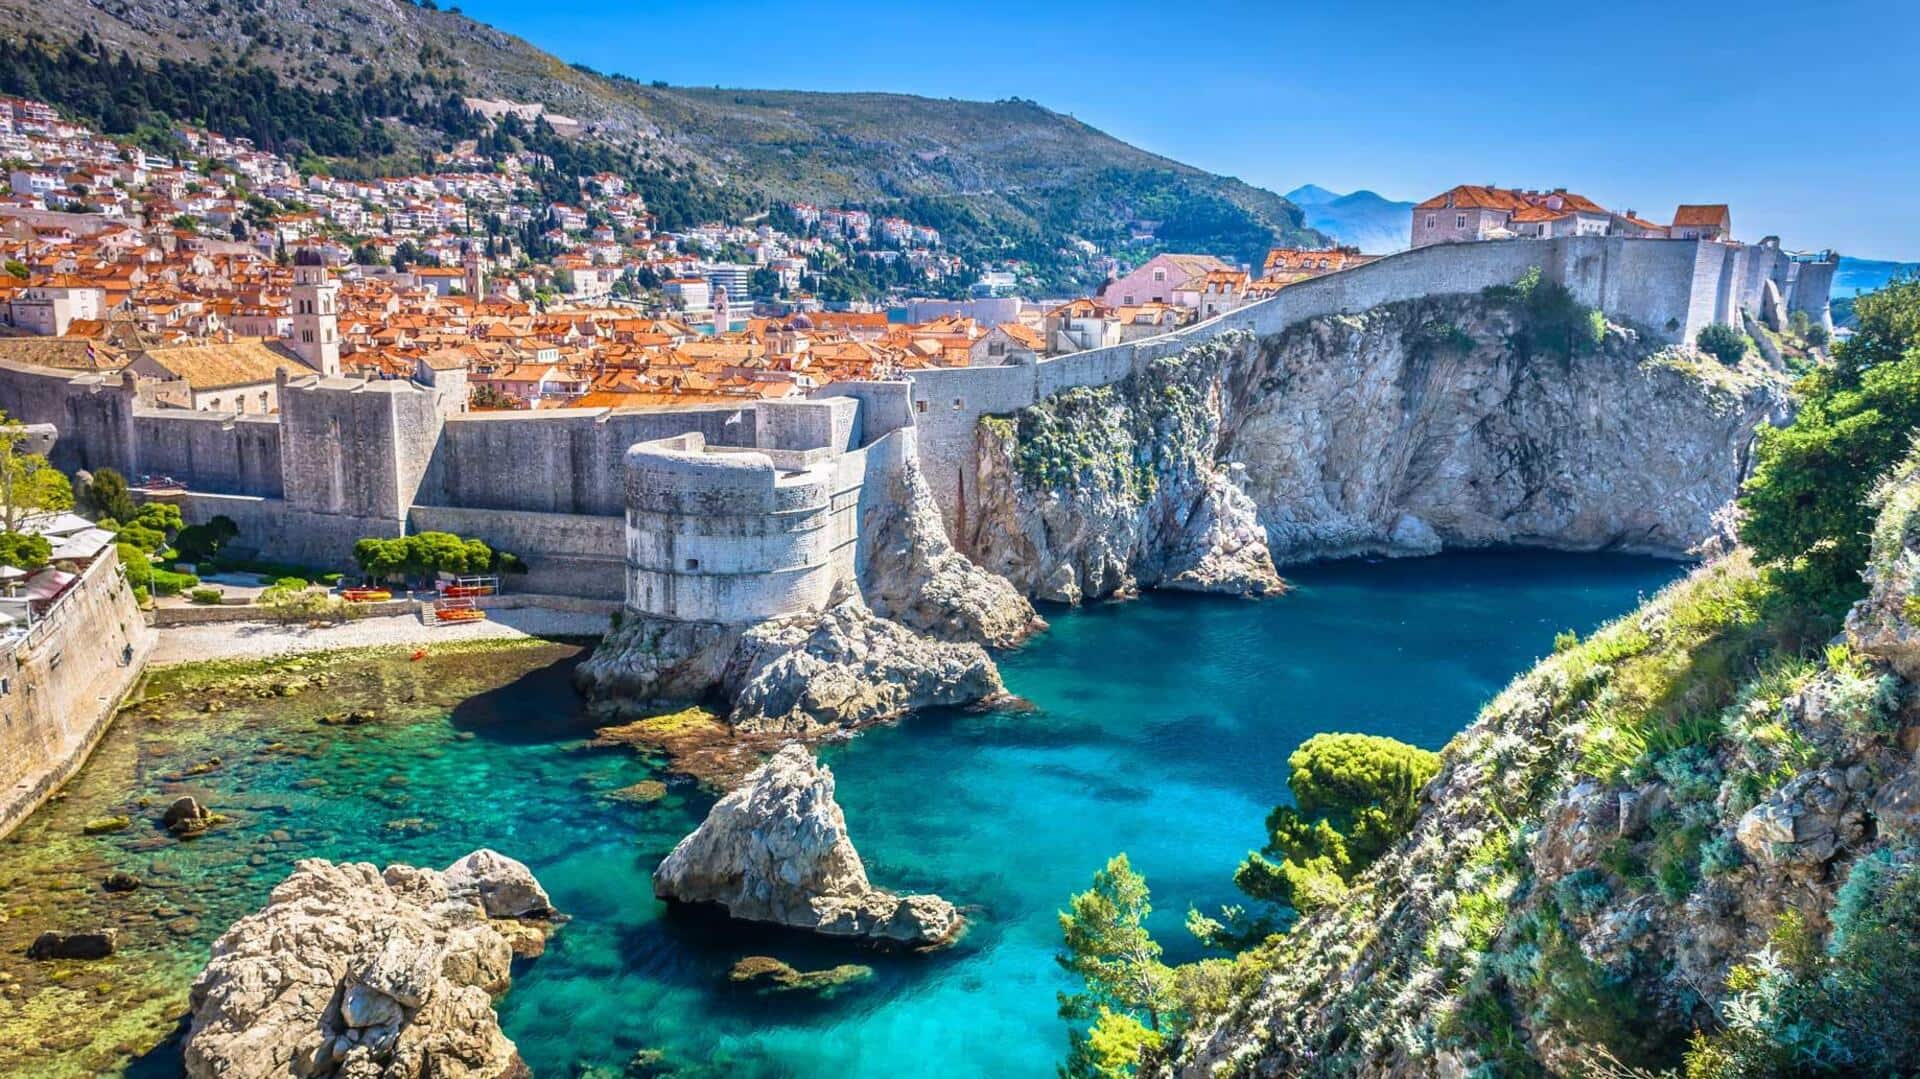 Traveling to Croatia with family and kids? Visit these places